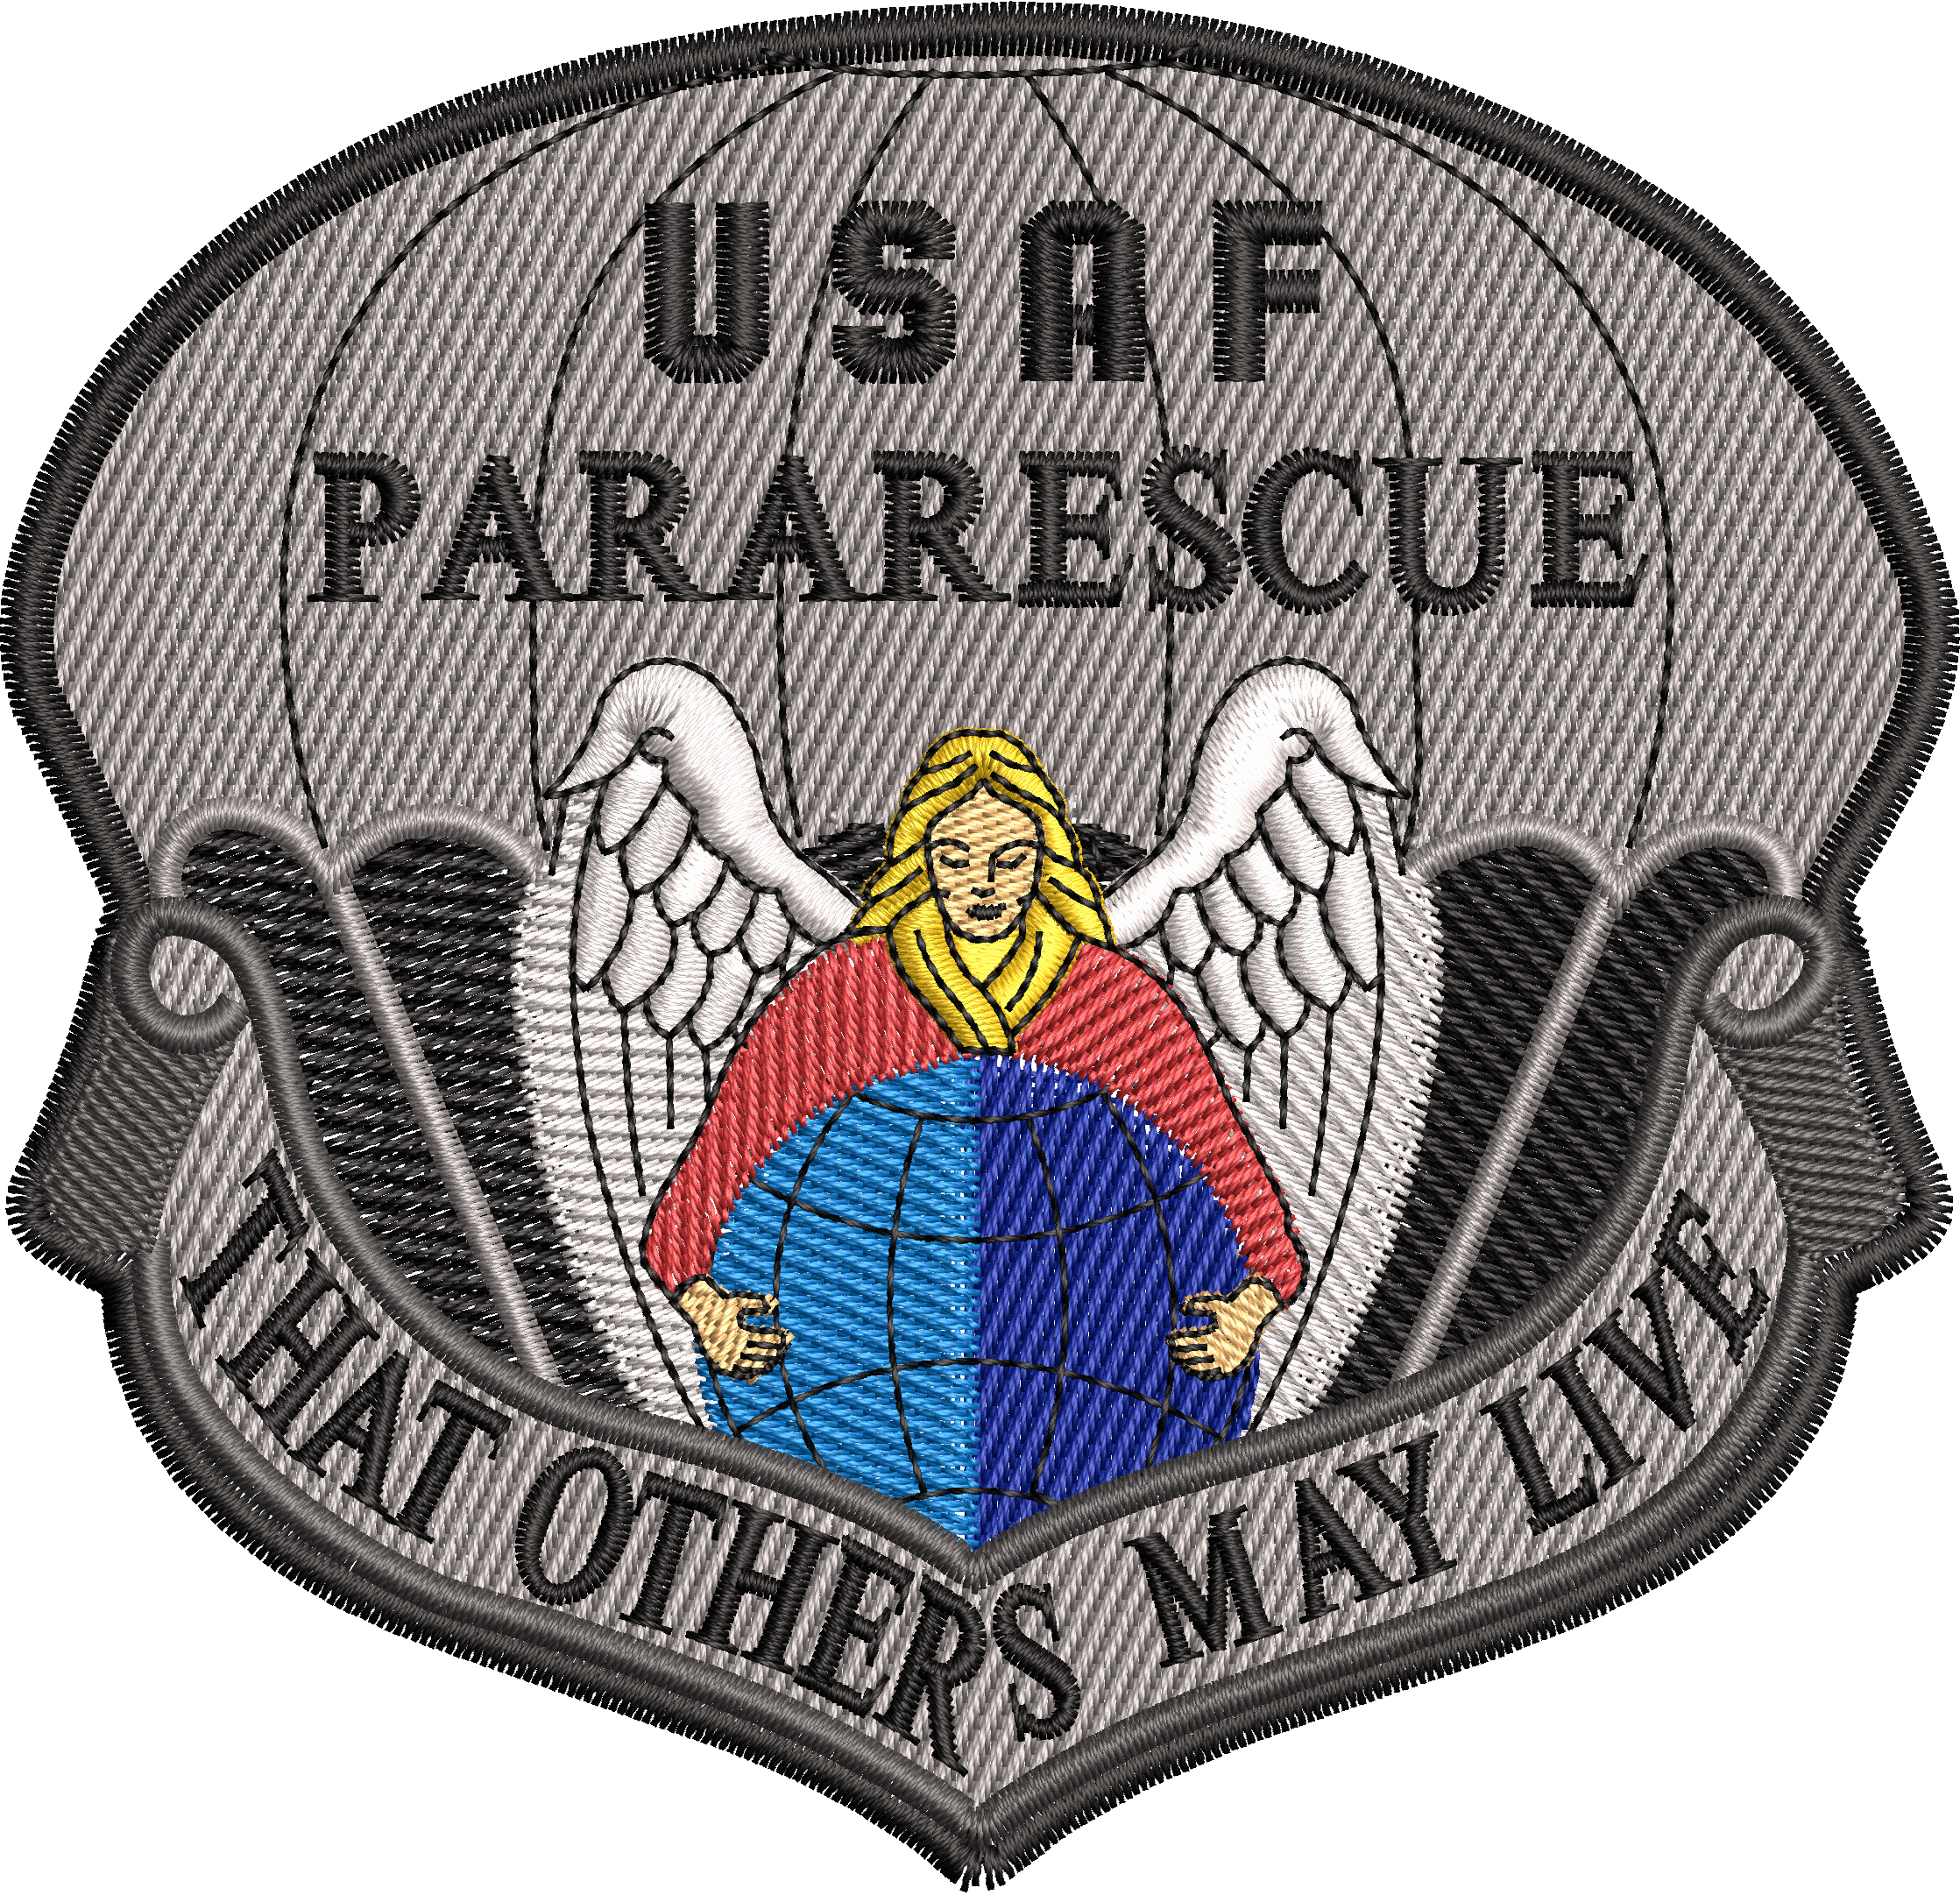 So Others May Live - Pararescue